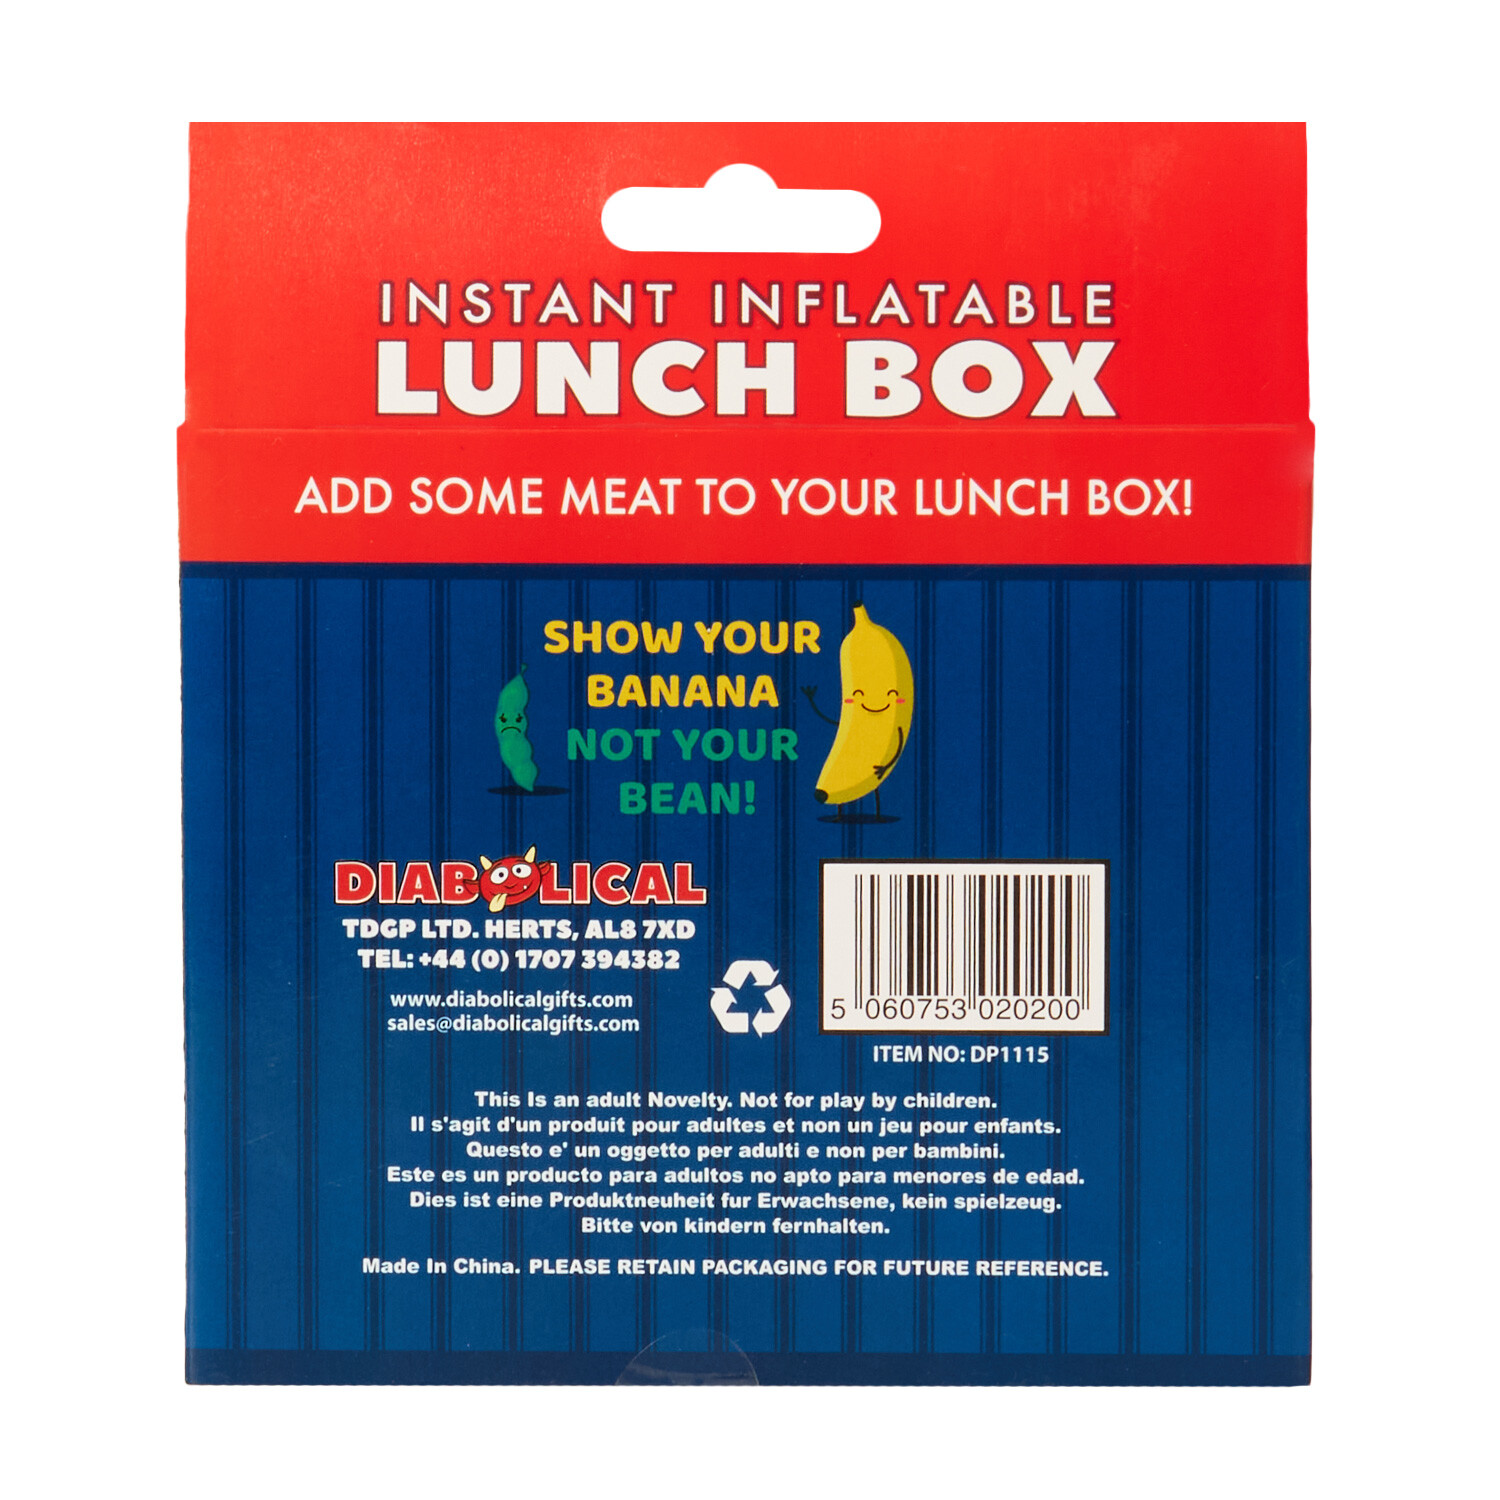 Instant Inflatable Lunch Box Image 6